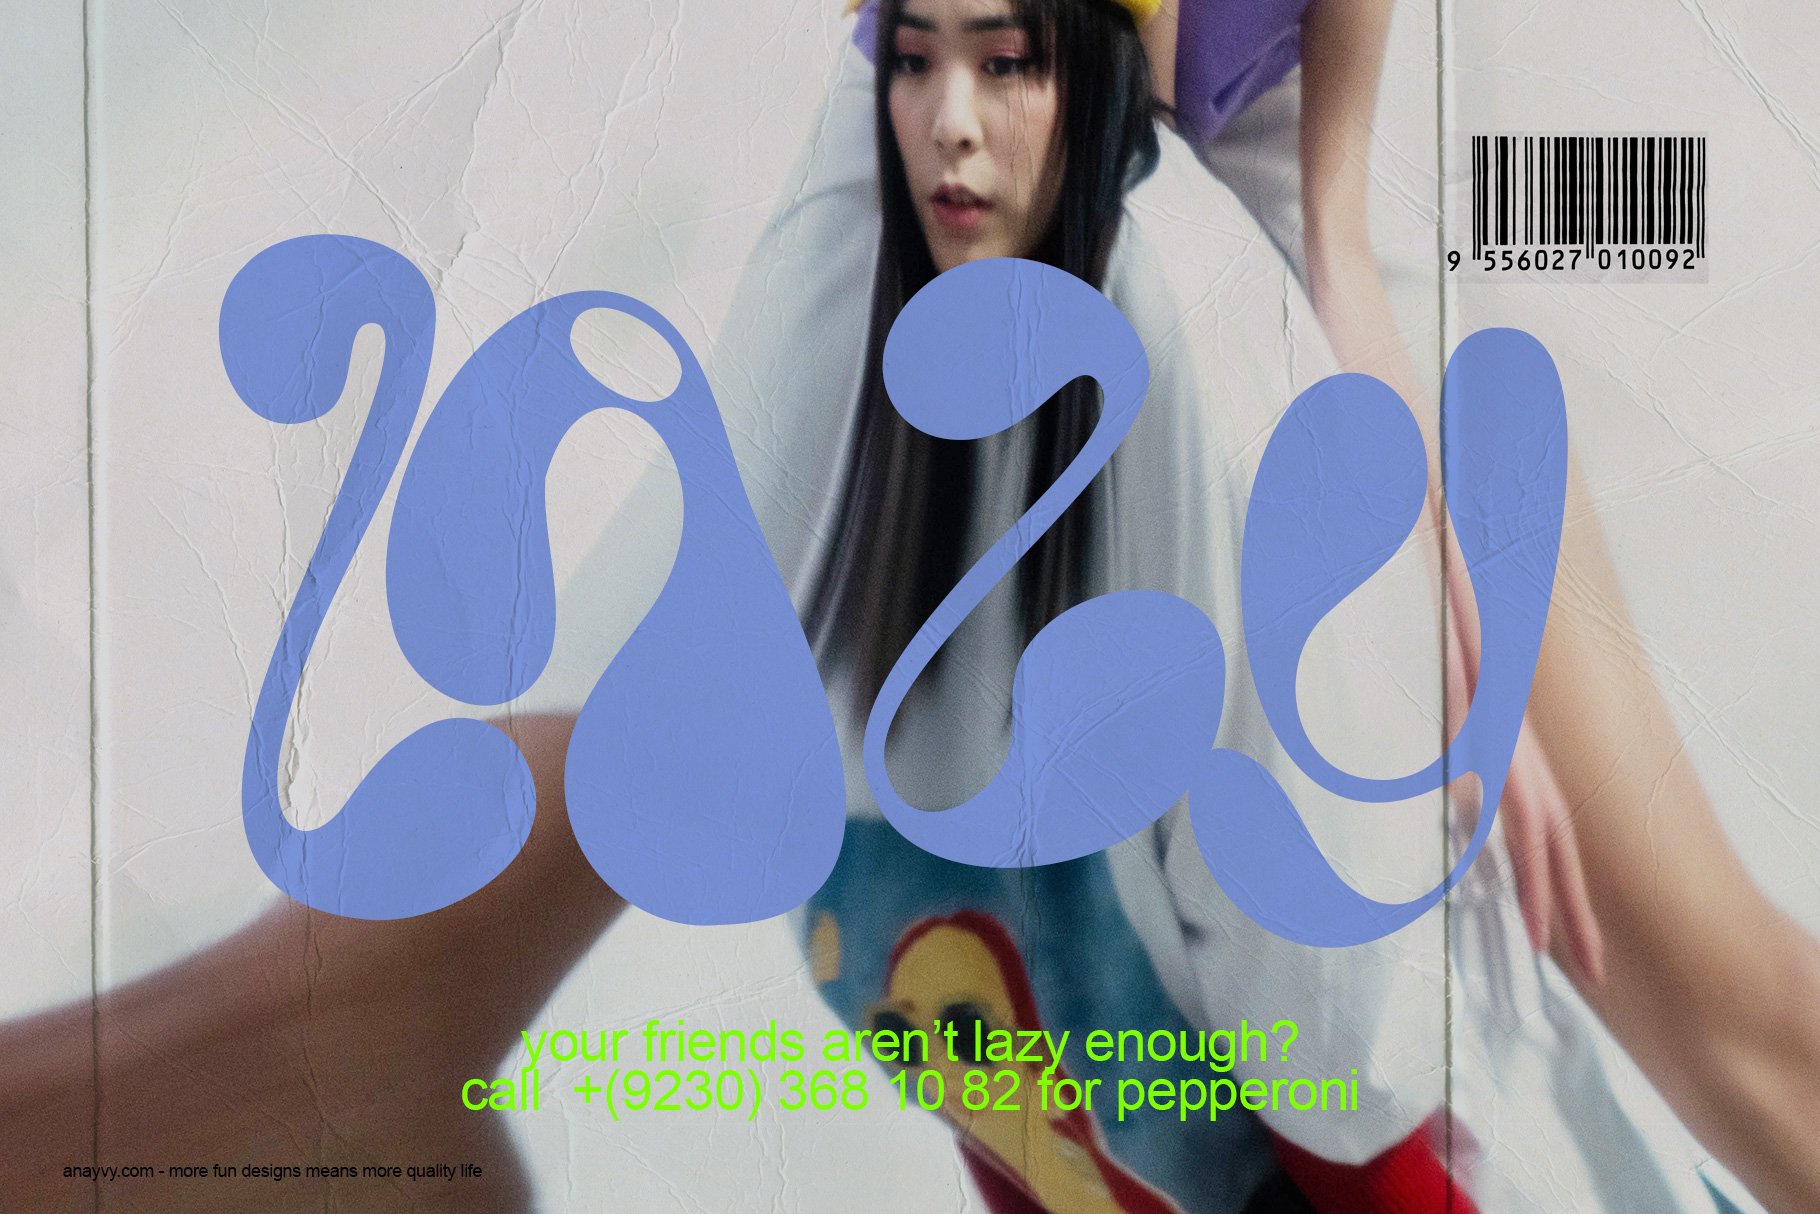 wobbly psychedelic trippy font liquid bubble y2k 2000 hippie ant design ana yvy 13 840